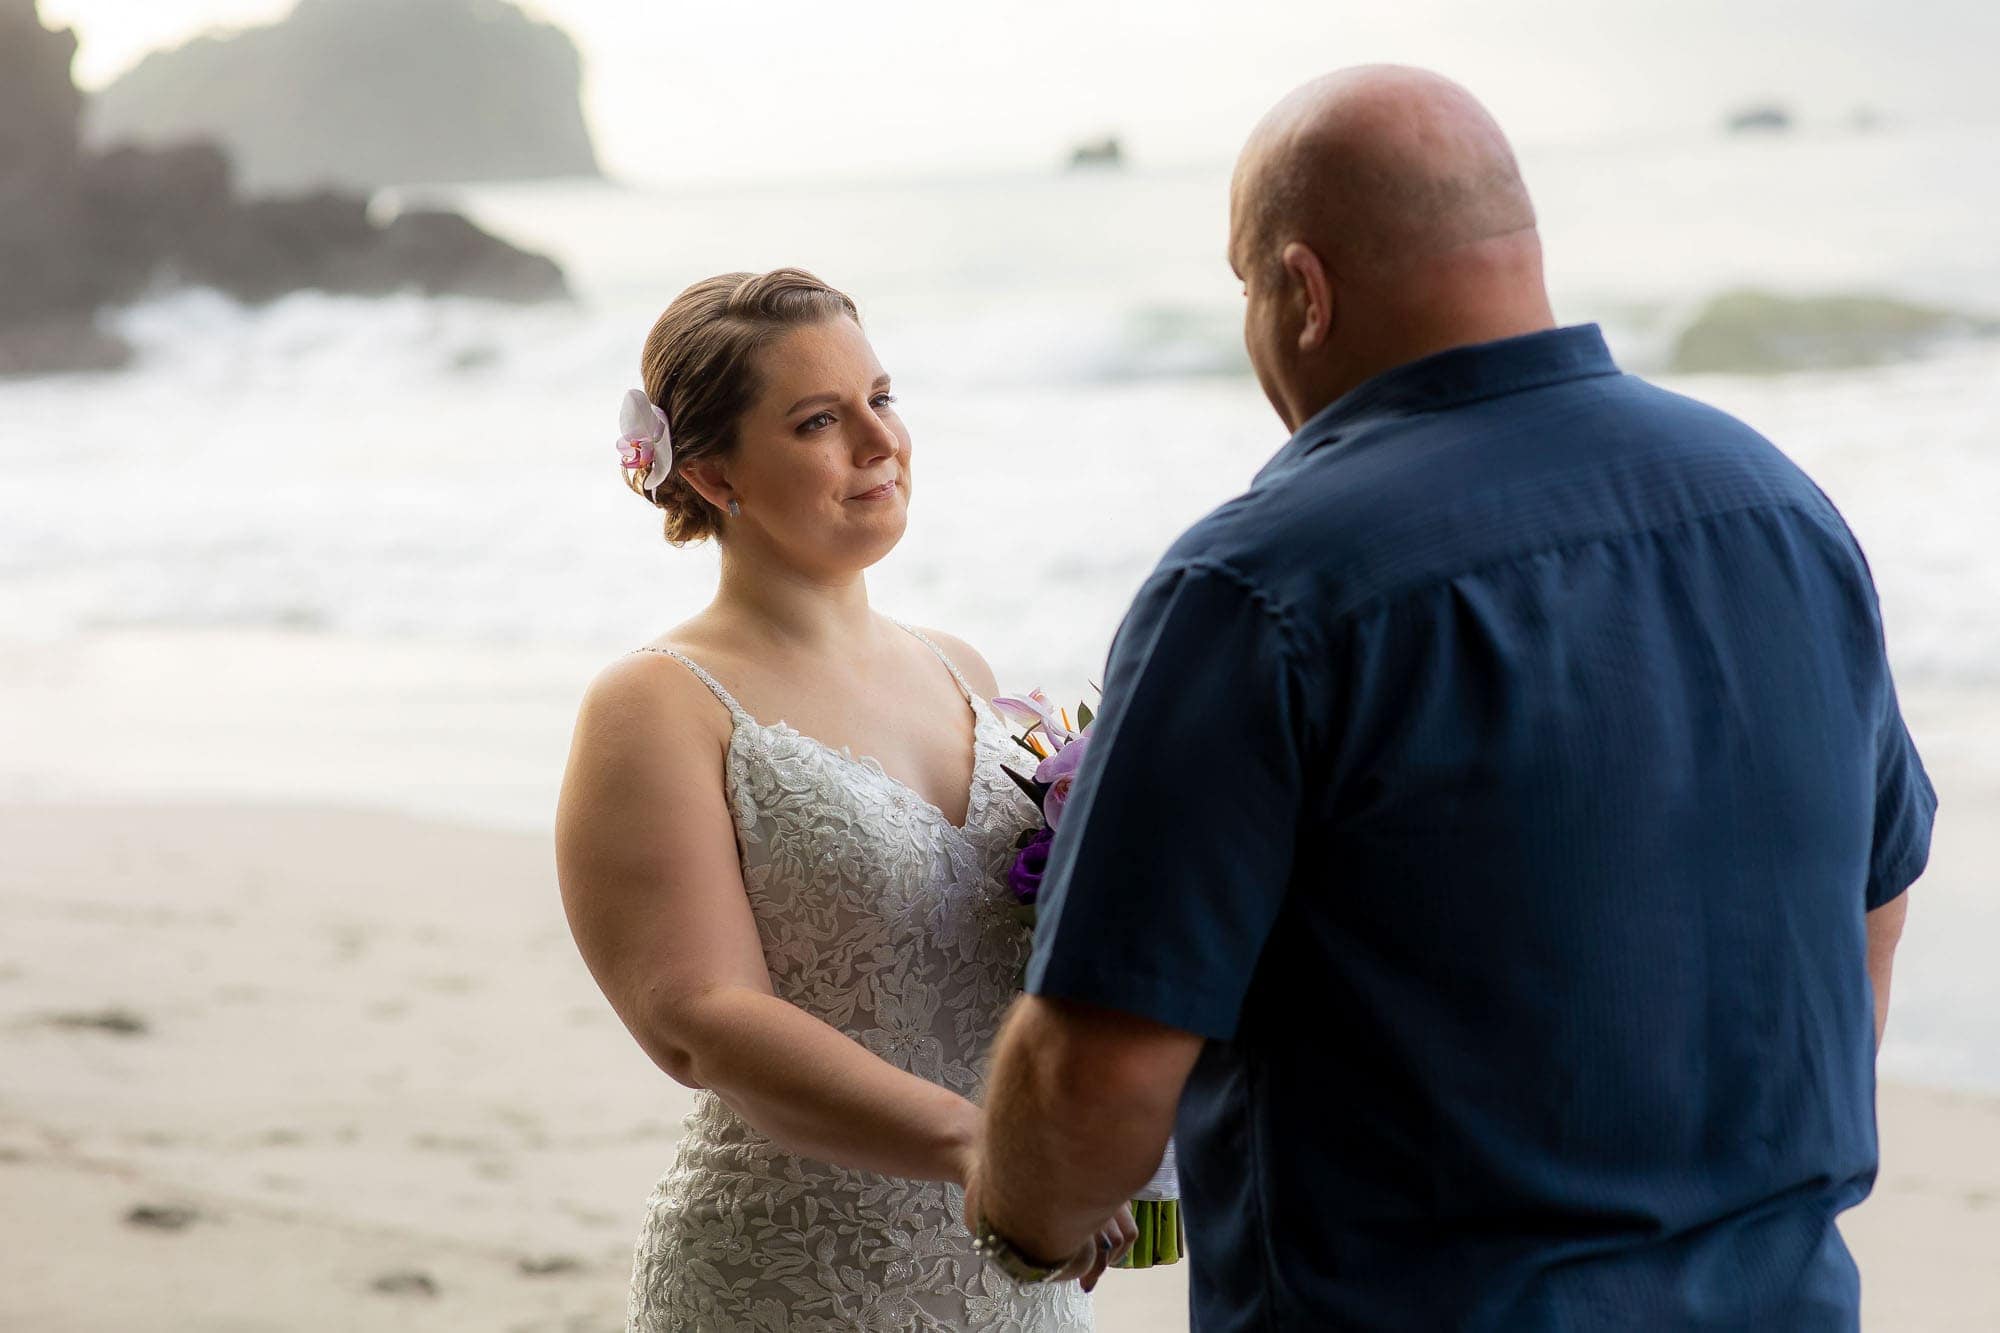 a beautiful elopement ceremony on the beach